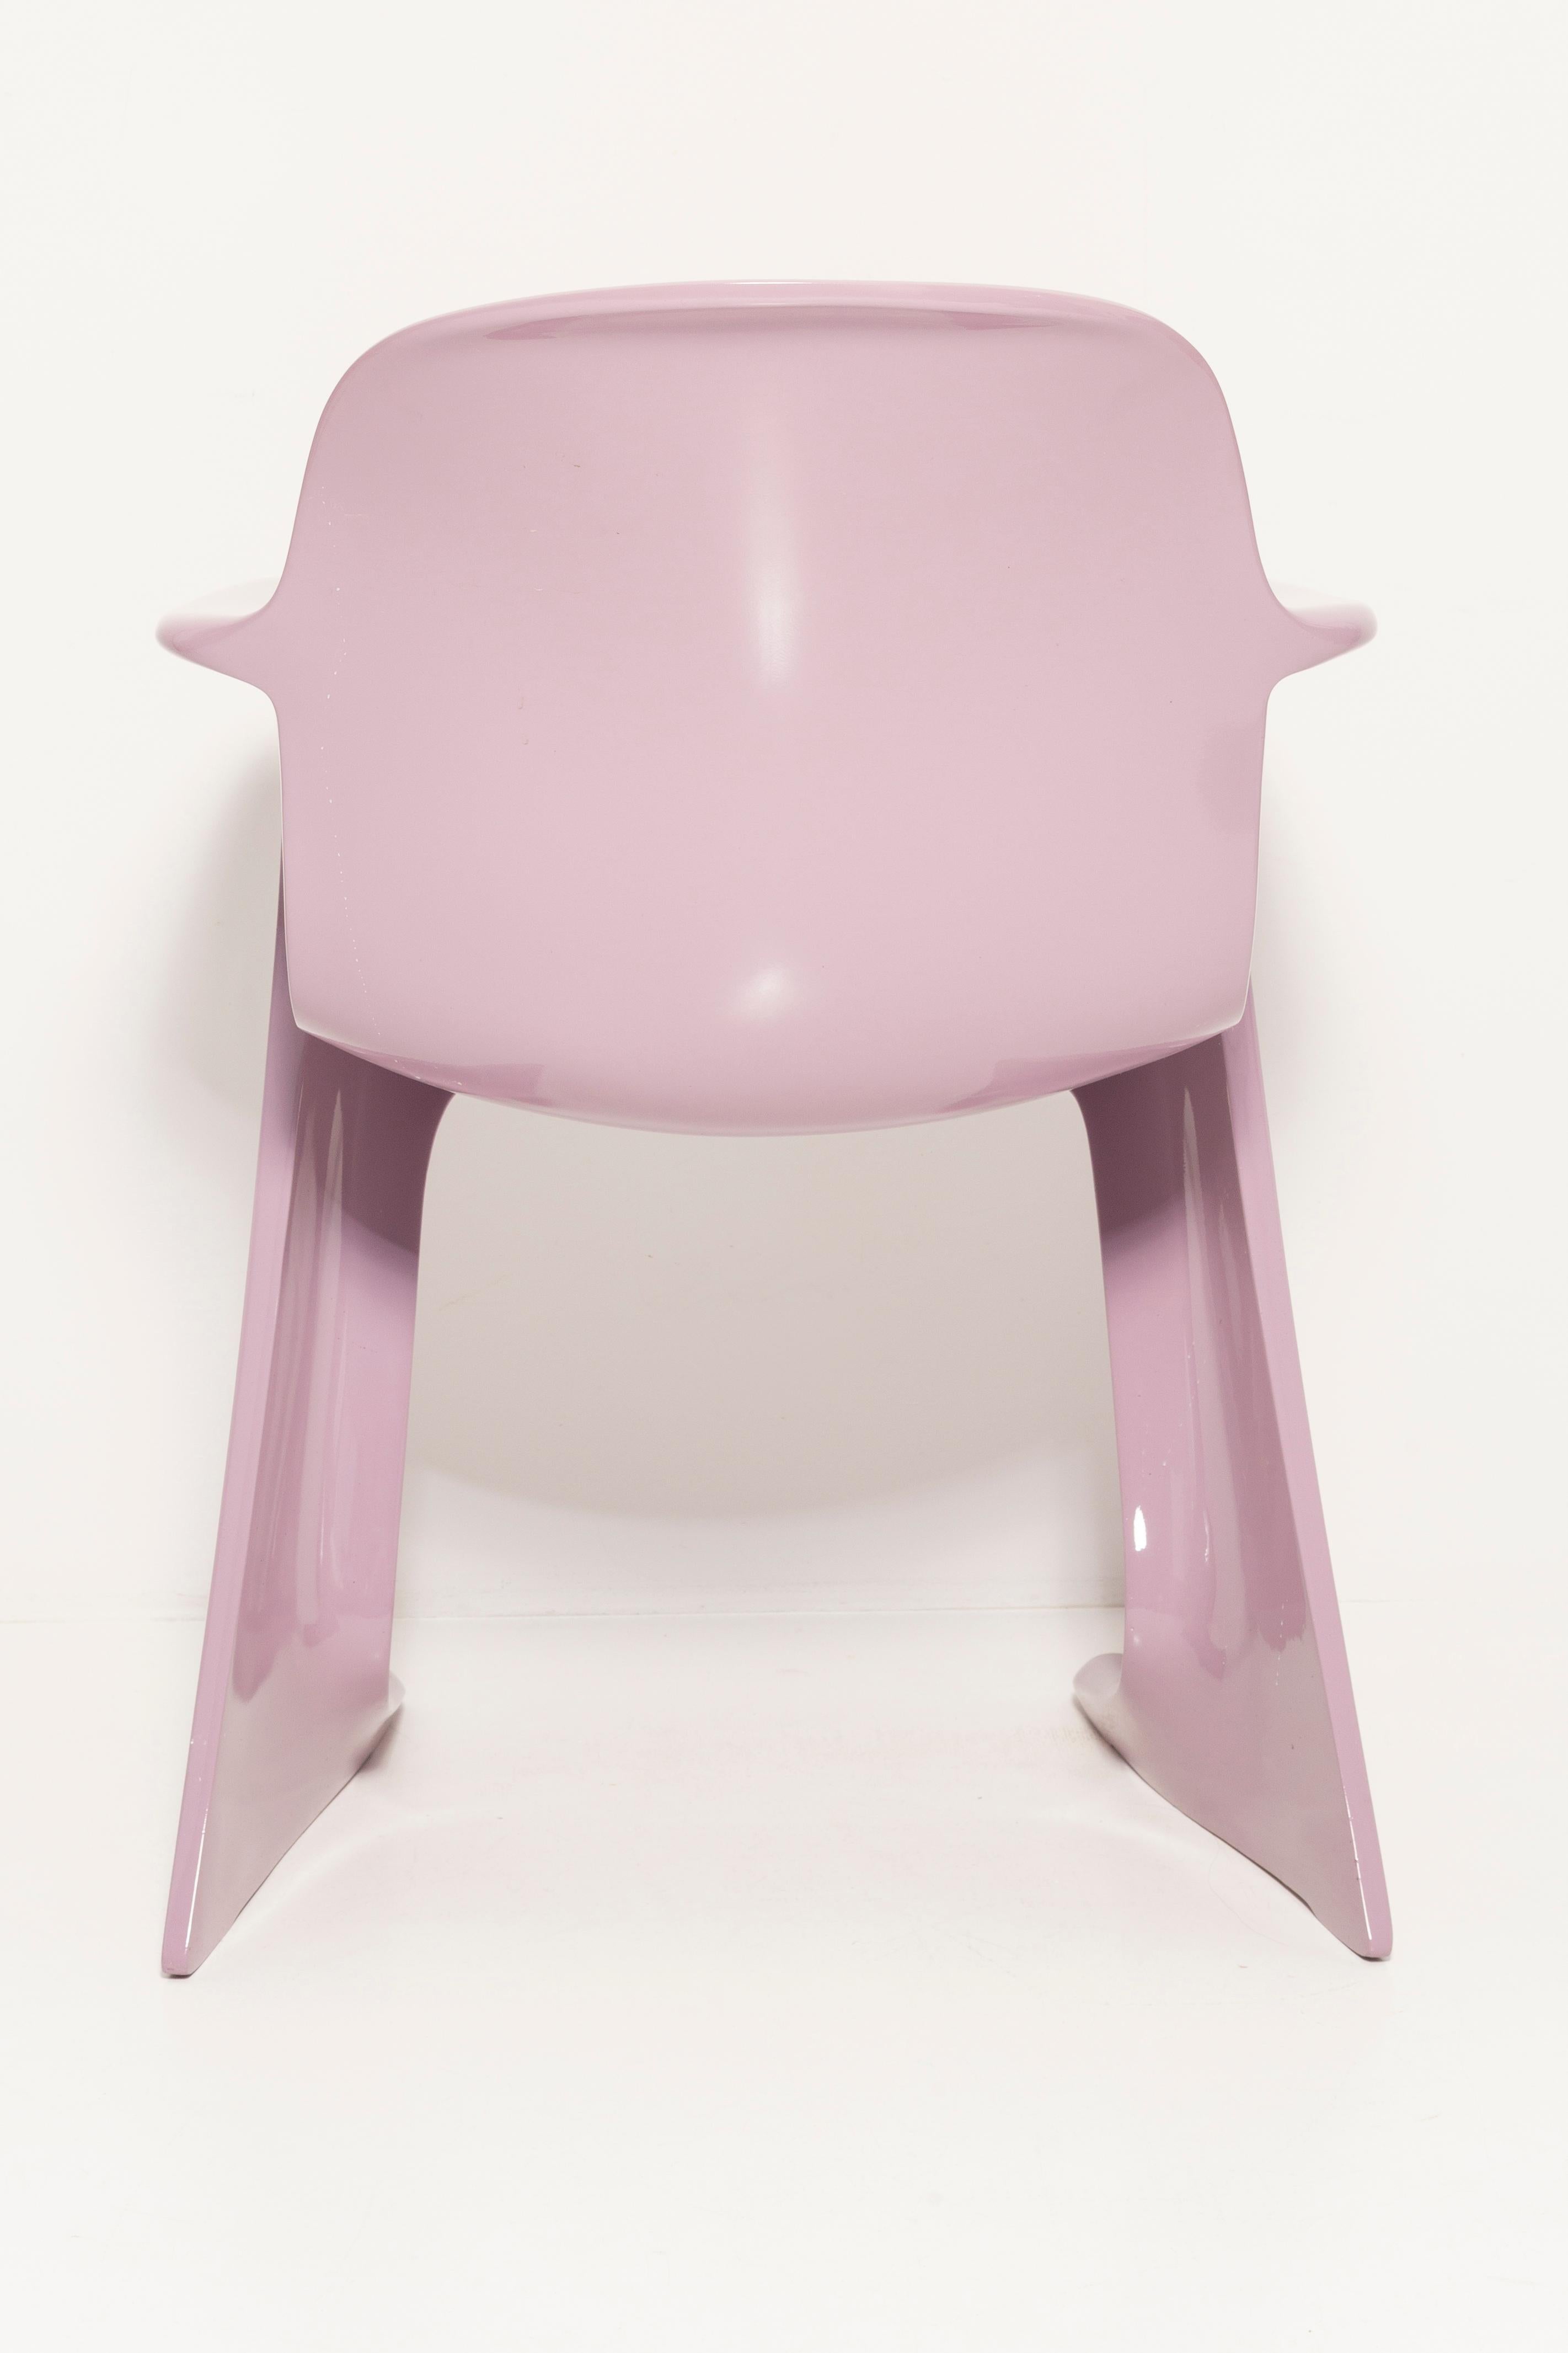 Mid Century Lavender Kangaroo Chair Designed by Ernst Moeckl, Germany, 1968 For Sale 3